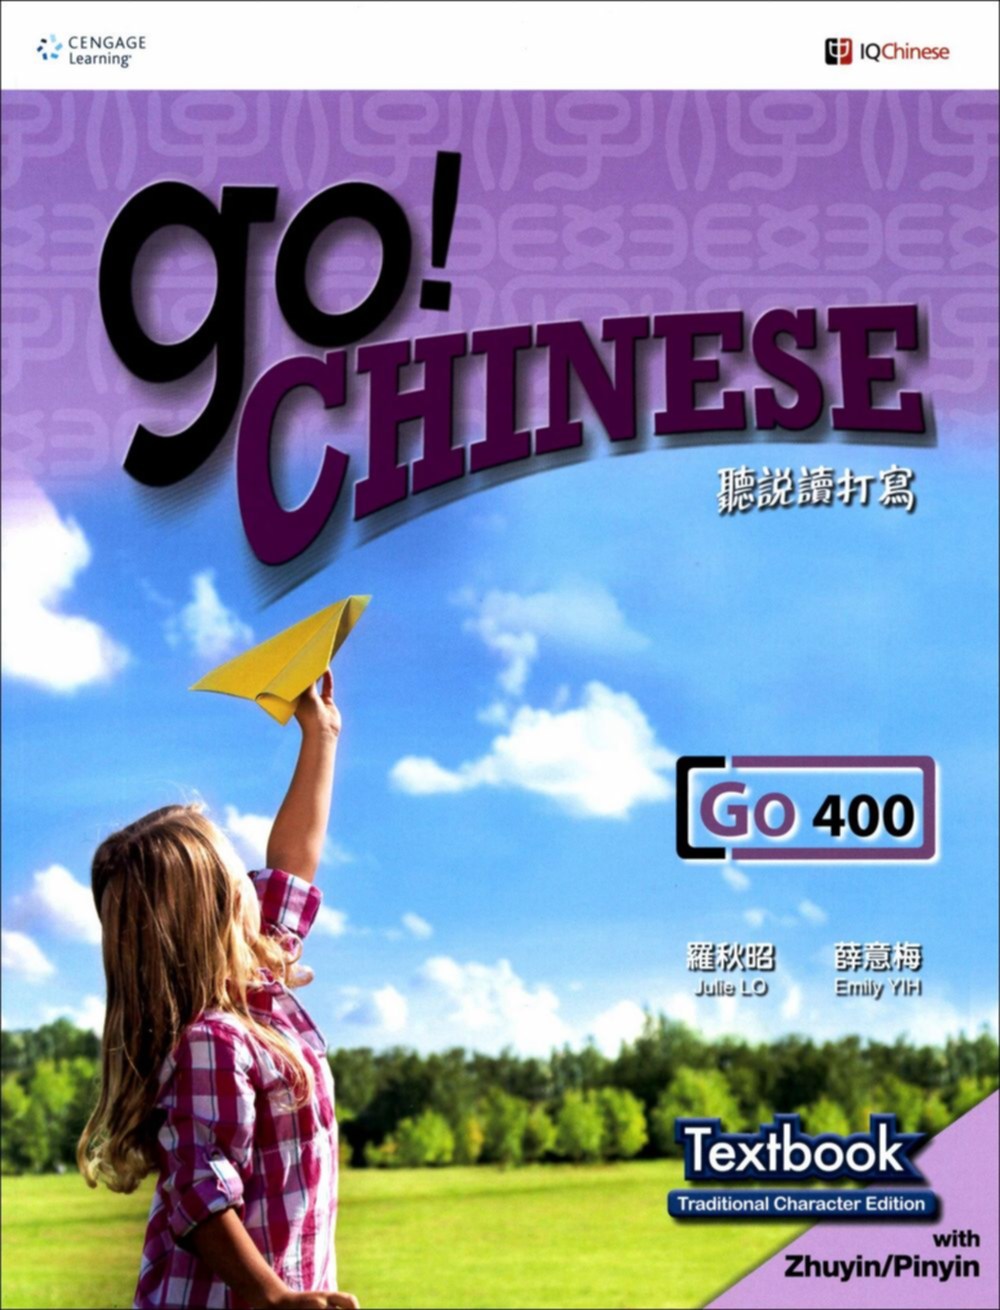 Go! Chinese Go400 Textbook (Traditional Character Edition with Zhuyin/Pinyin)